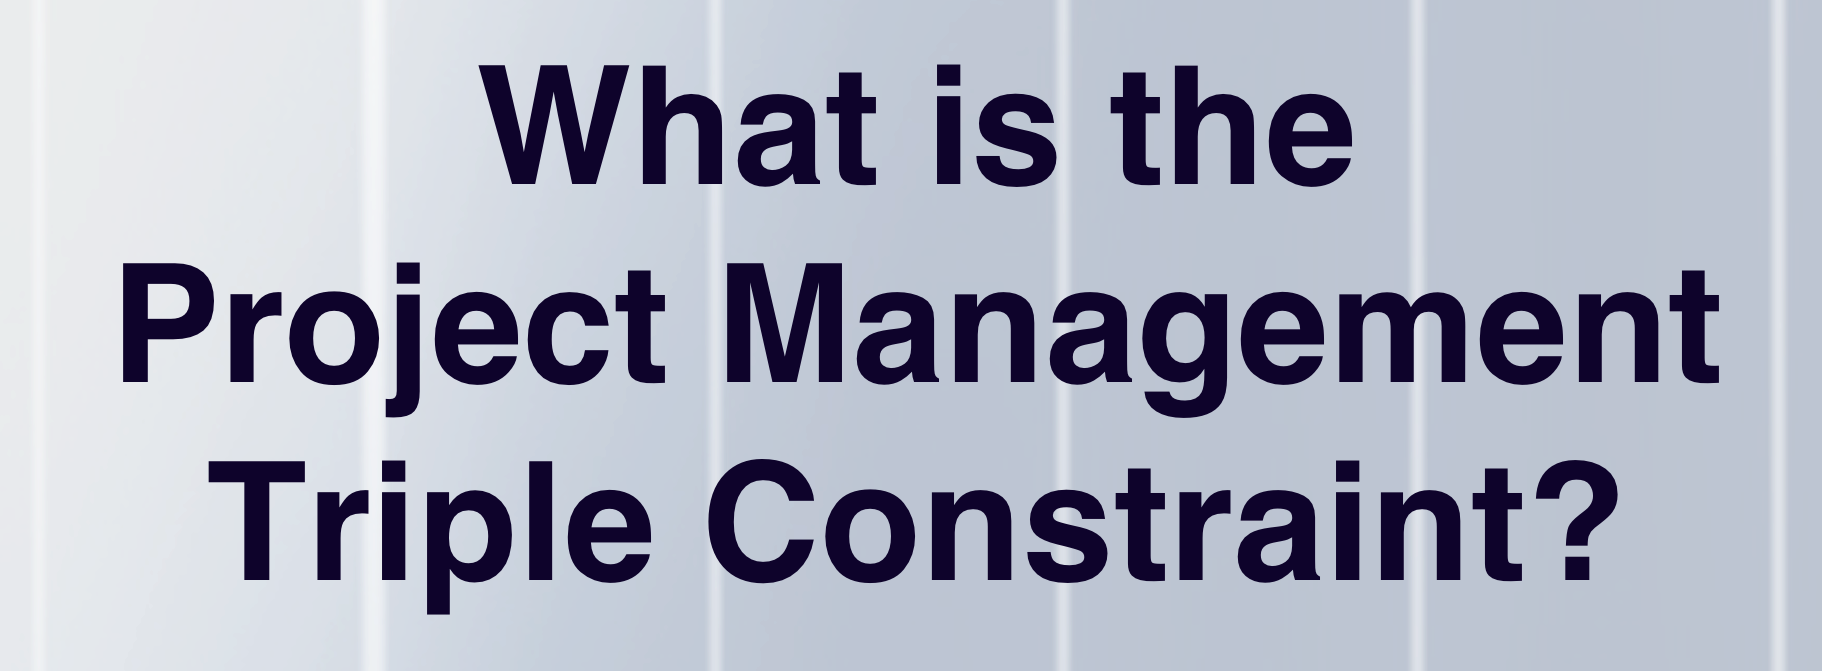 What is the Project Management Triple Constraint?